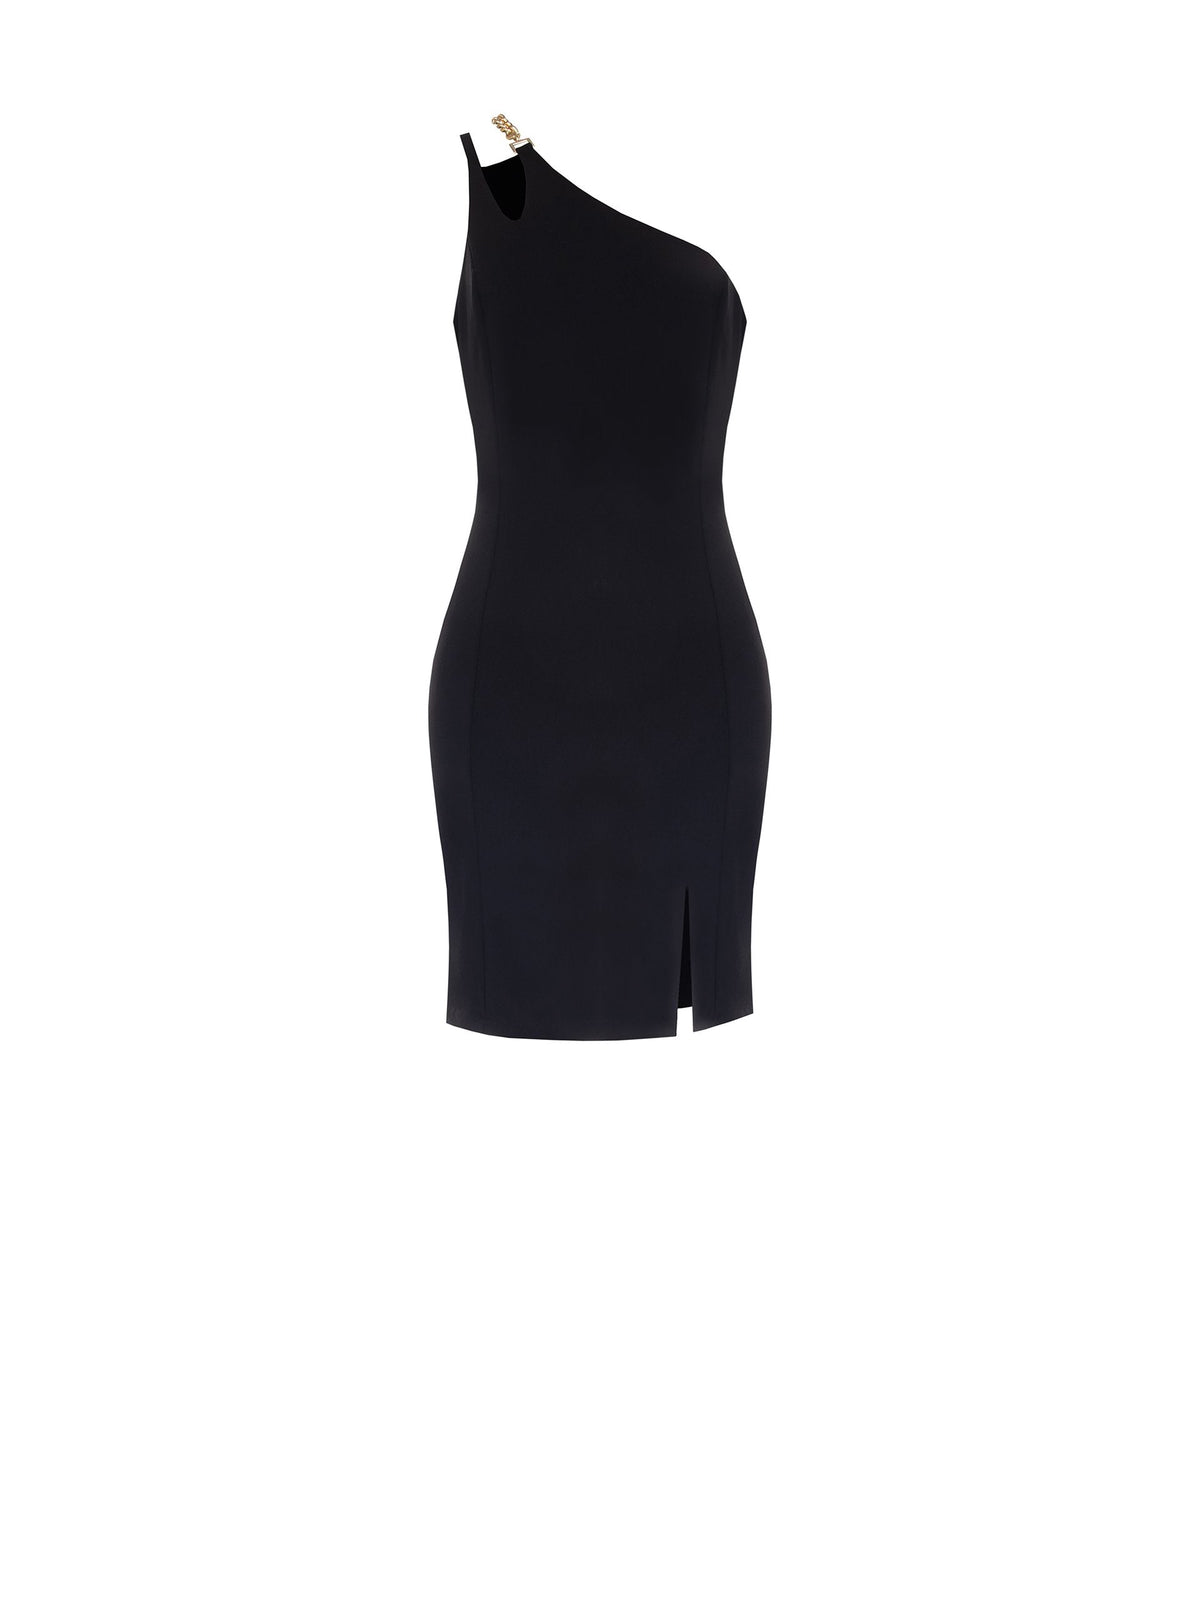 Short Sheath Dress in Scuba Crepe Fabric with Chain Straps